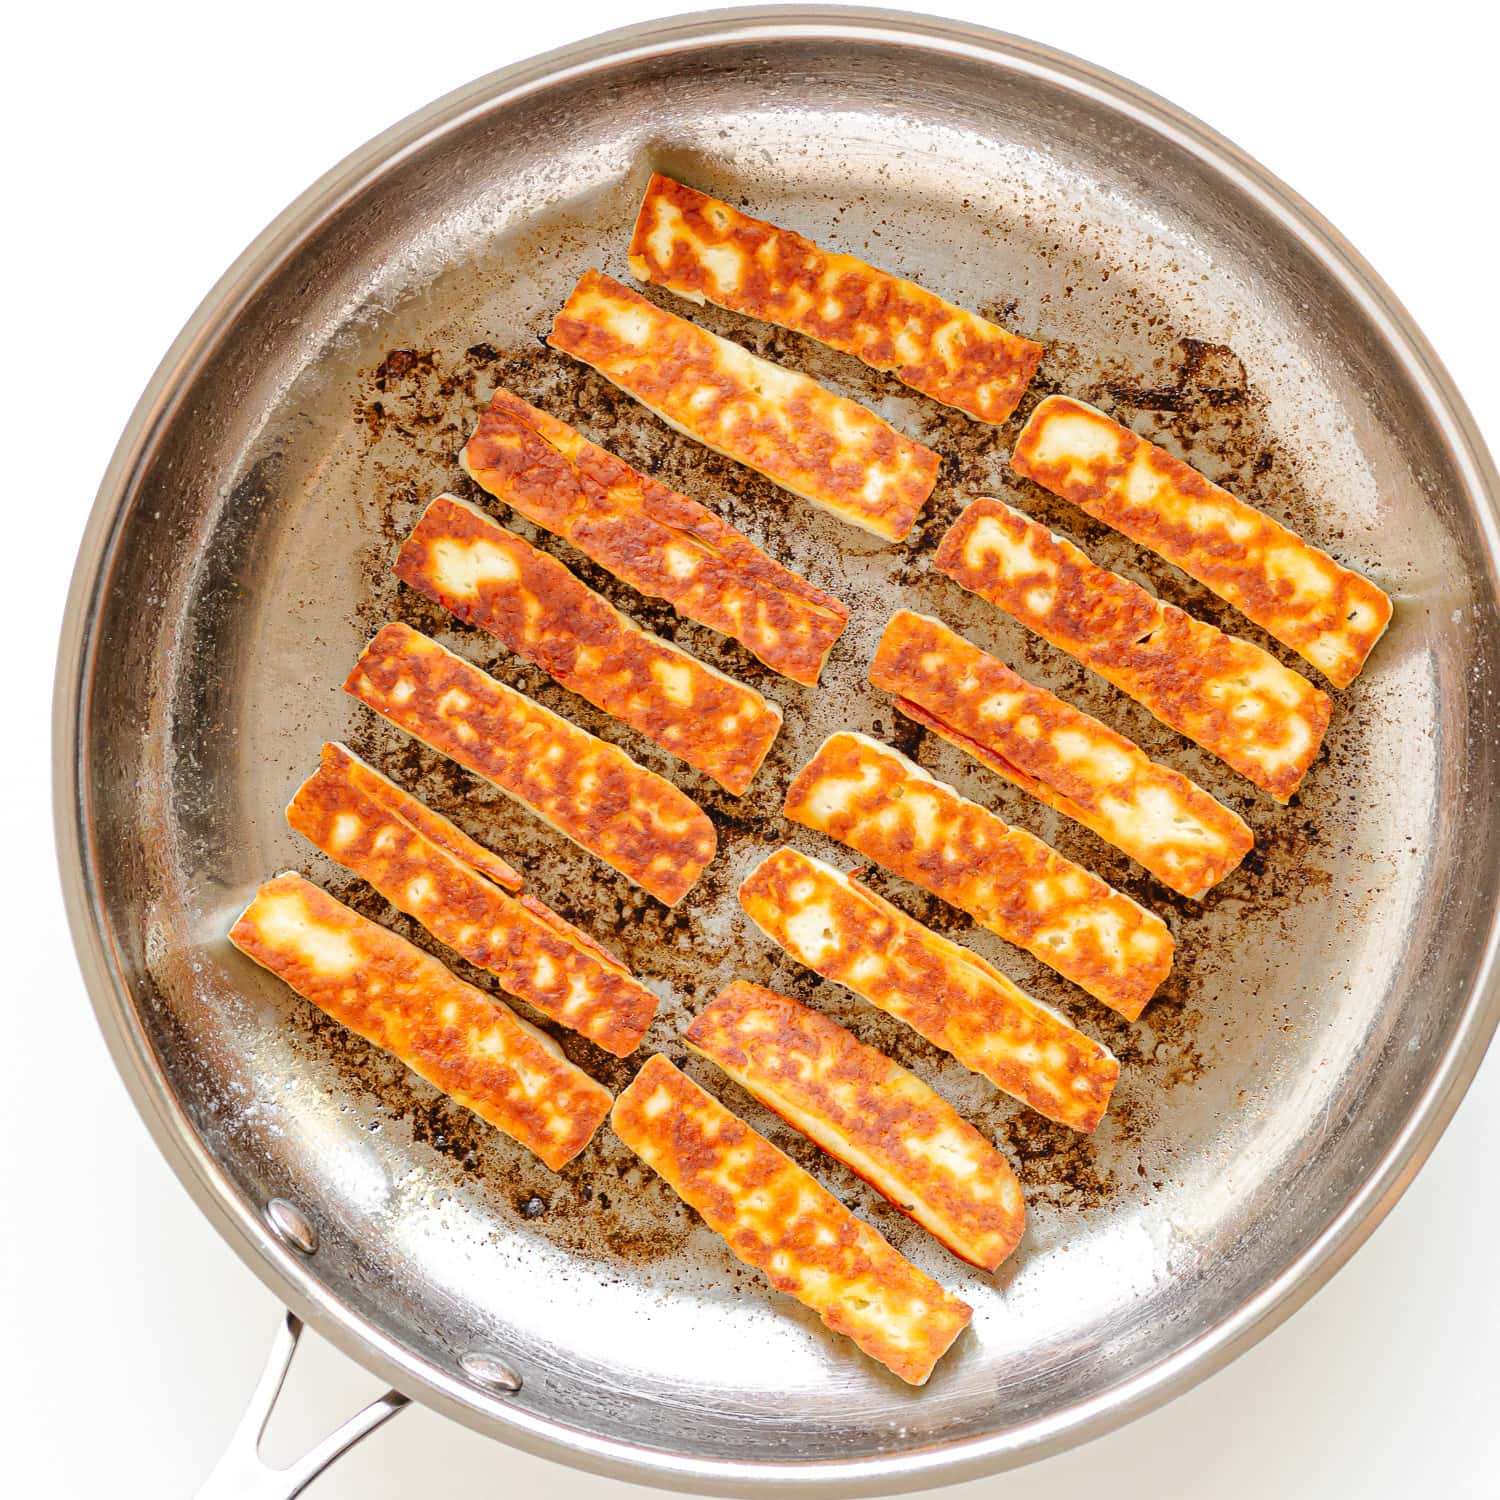 Strips of halloumi being pan fried in a stainless steel skillet.